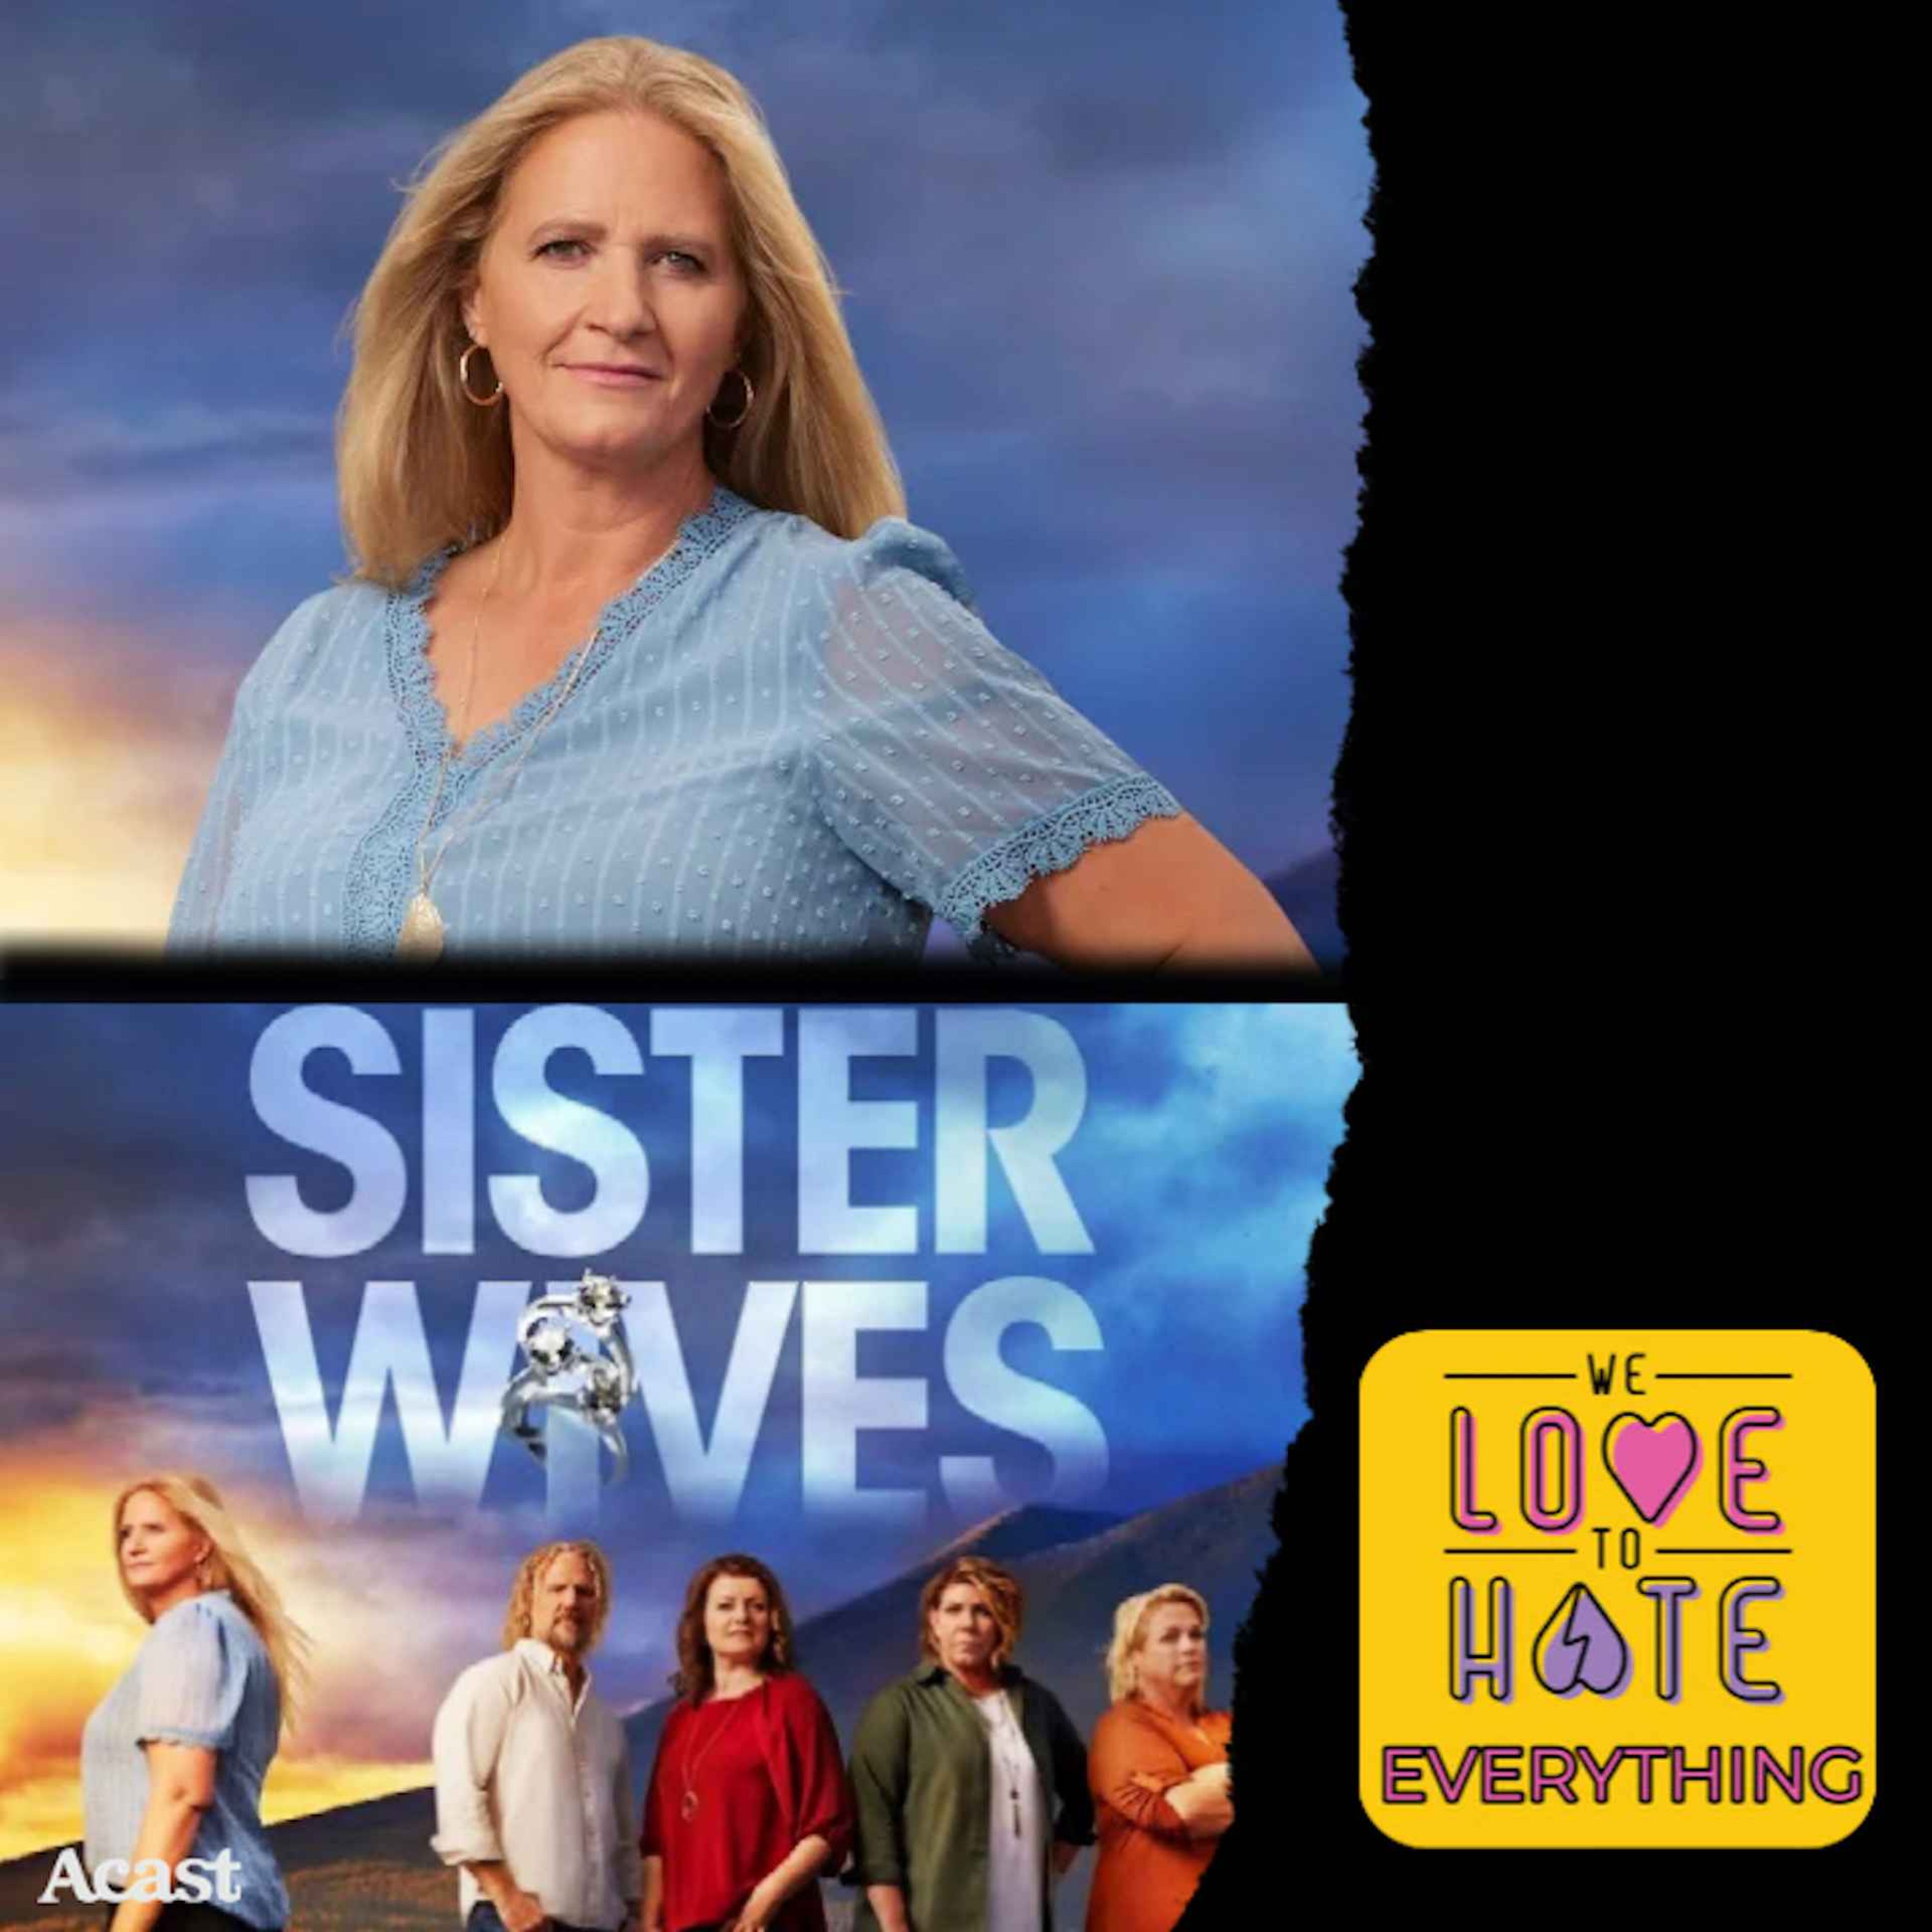 Sister Wives S17 E16 ”One on One Part 2”